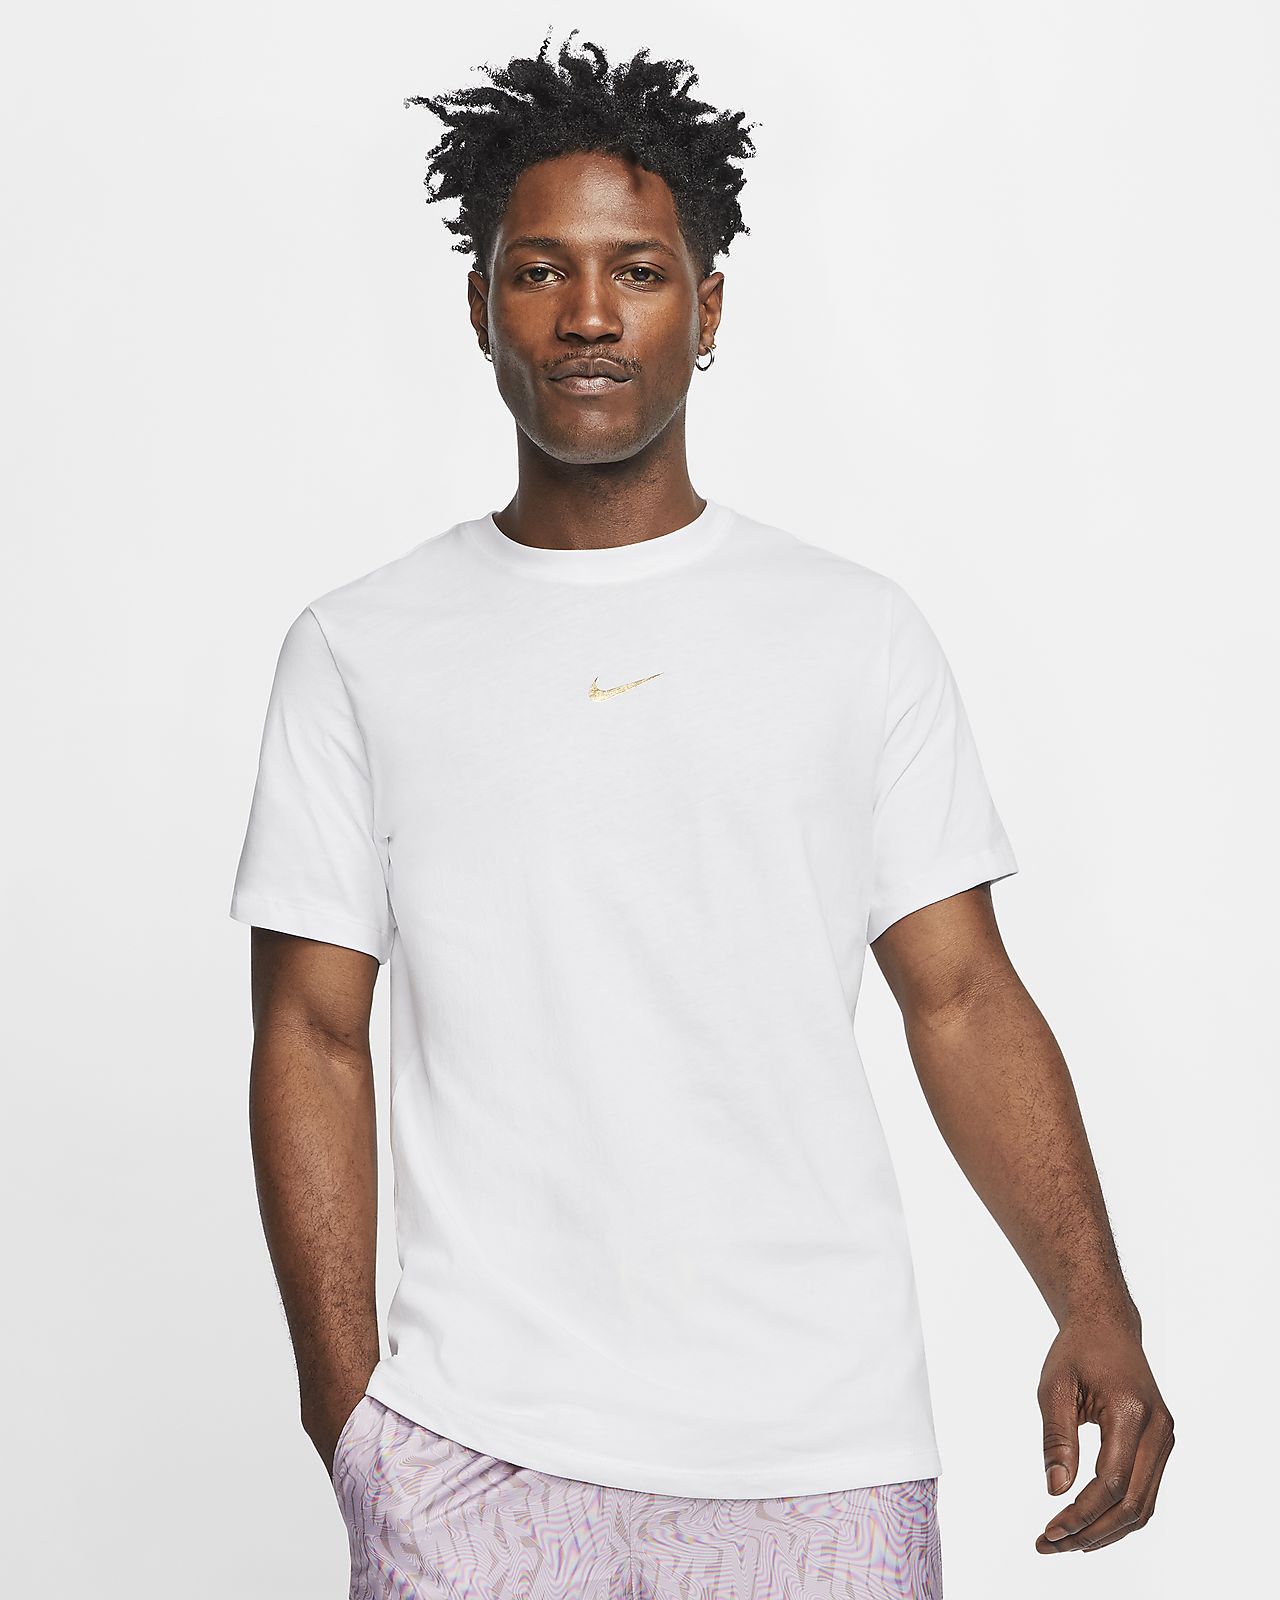 Buy > nike middle swoosh t shirt mens > in stock